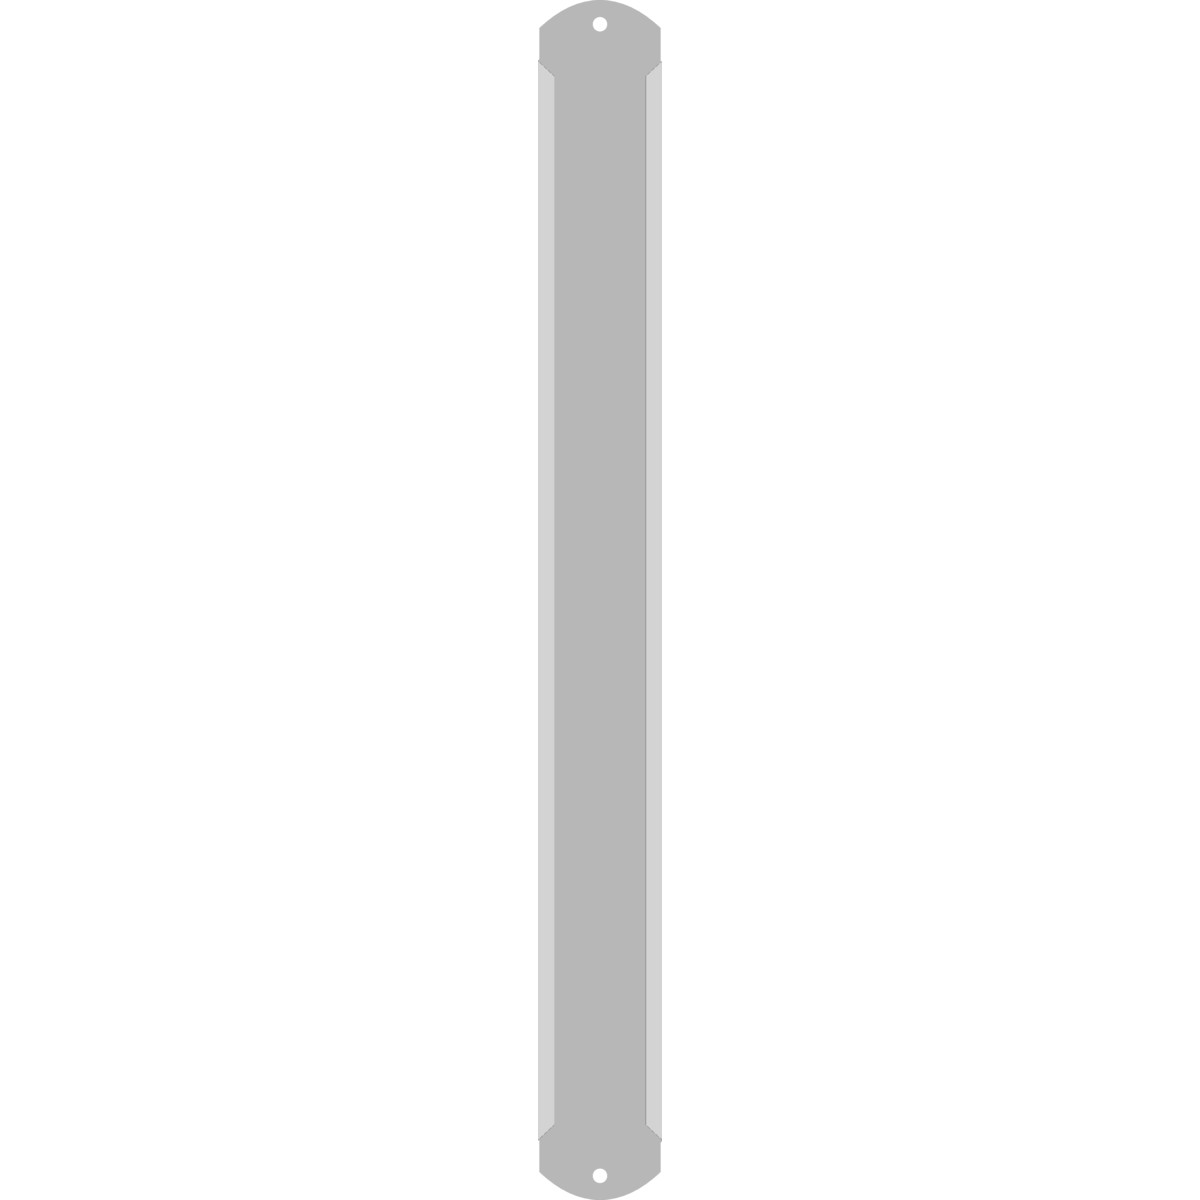 1" Vertical Character Aluminum Holder - Fits 5 Characters